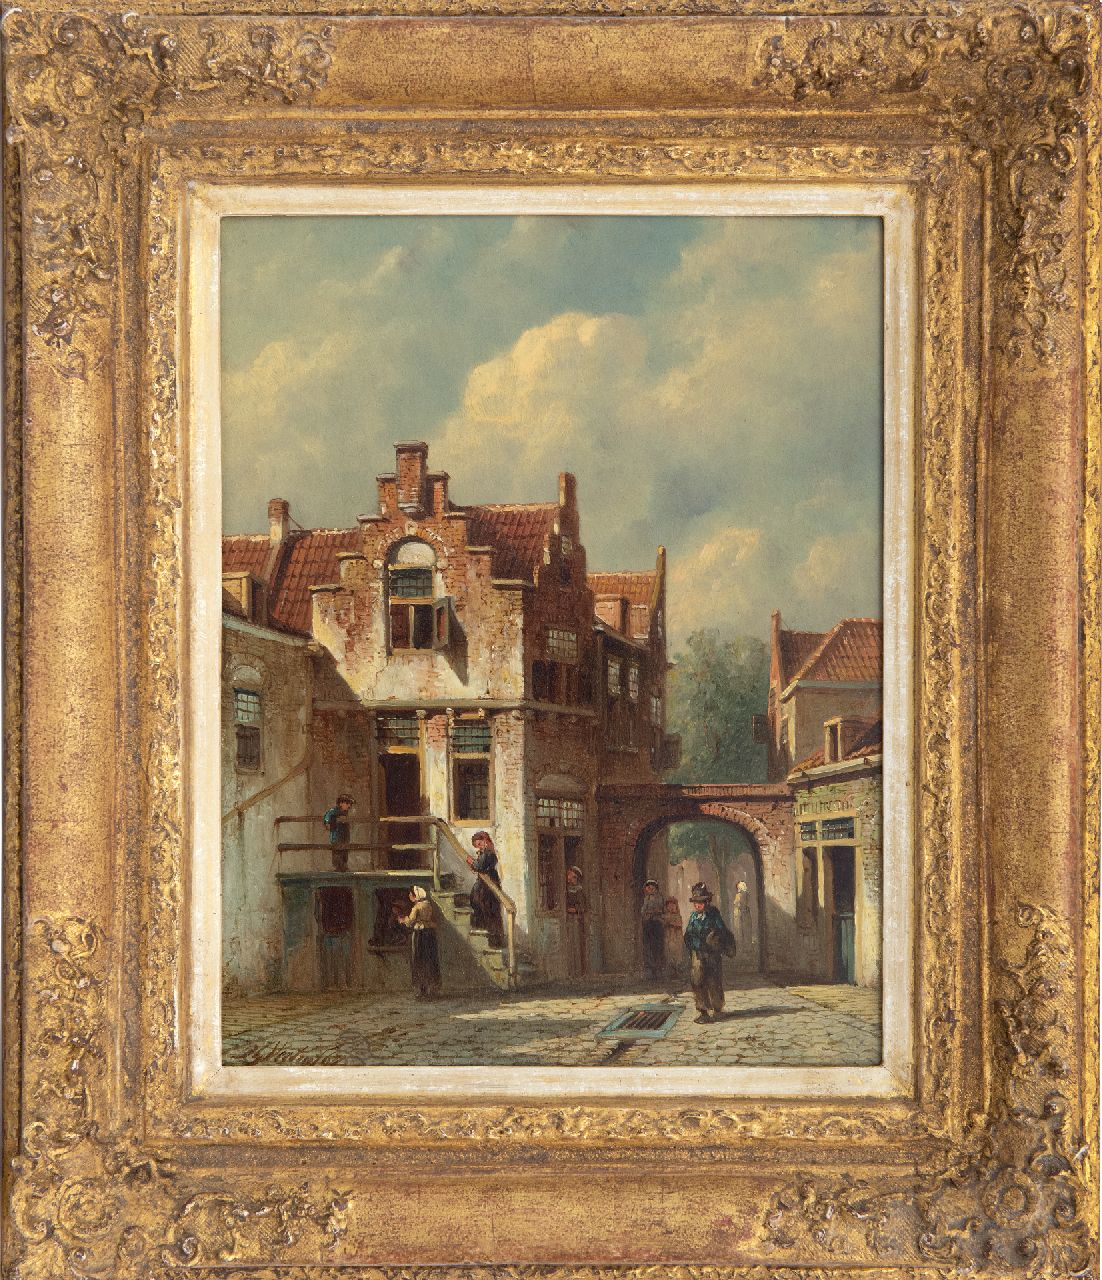 Vertin P.G.  | Petrus Gerardus Vertin | Paintings offered for sale | A sunny Dutch street and some people at the town gate, oil on panel 26.1 x 20.5 cm, signed l.l. and dated '67